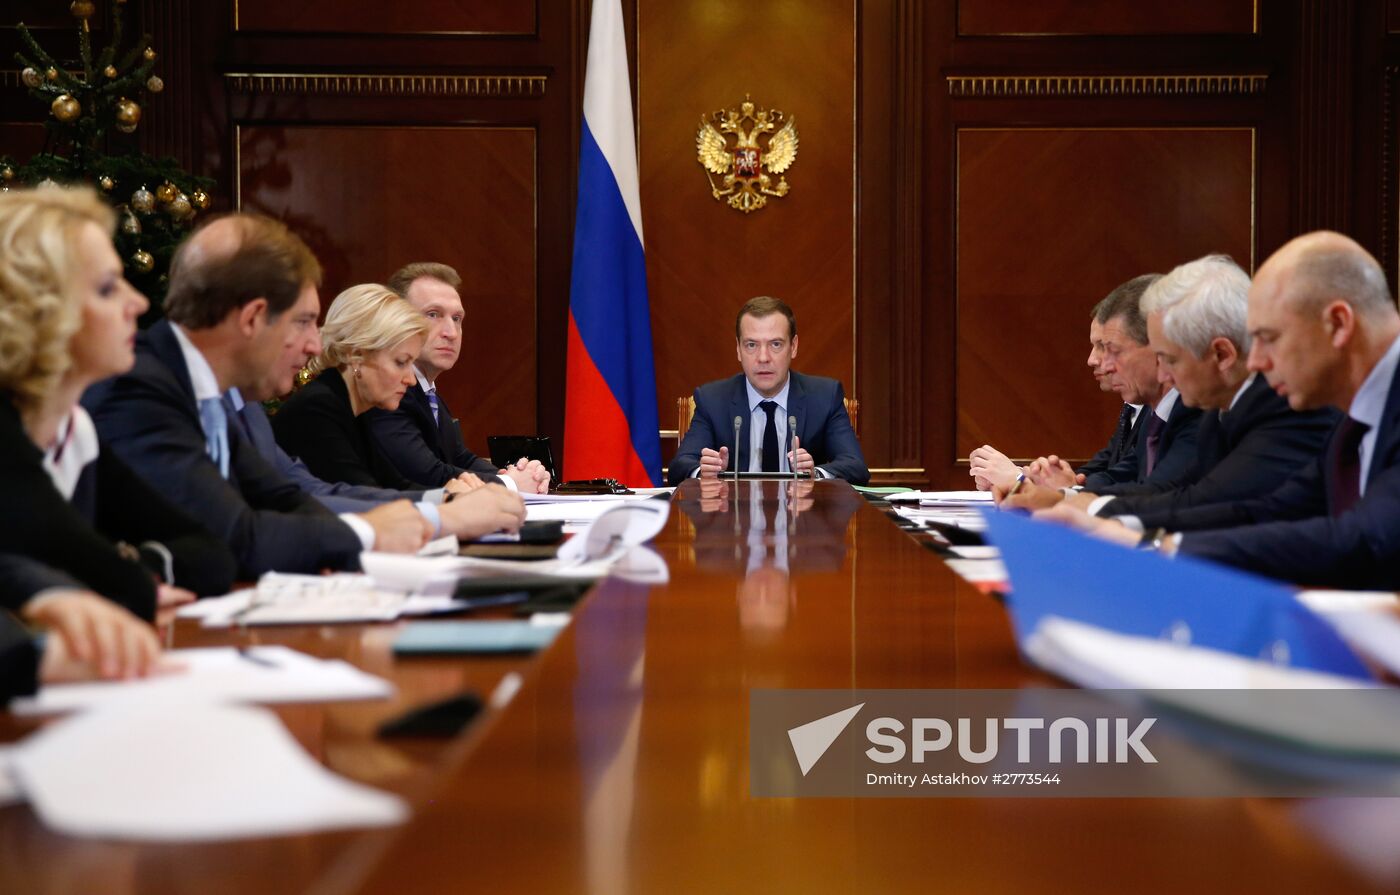 Prime Minister Dmitry Medvedev chairs meeting on economic and financial issues